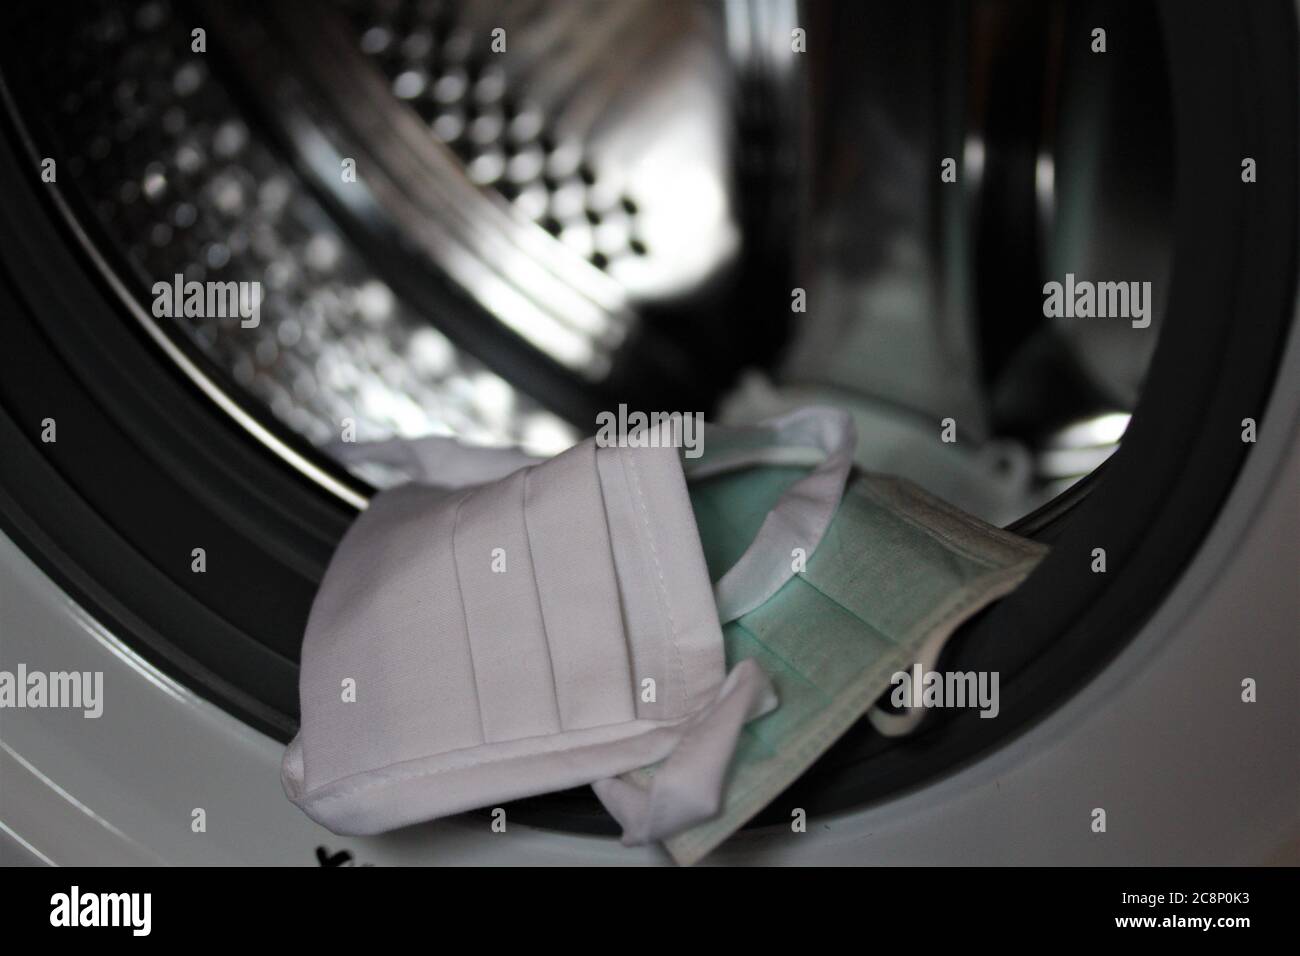 Dirty mouth protection in the washing machine Stock Photo